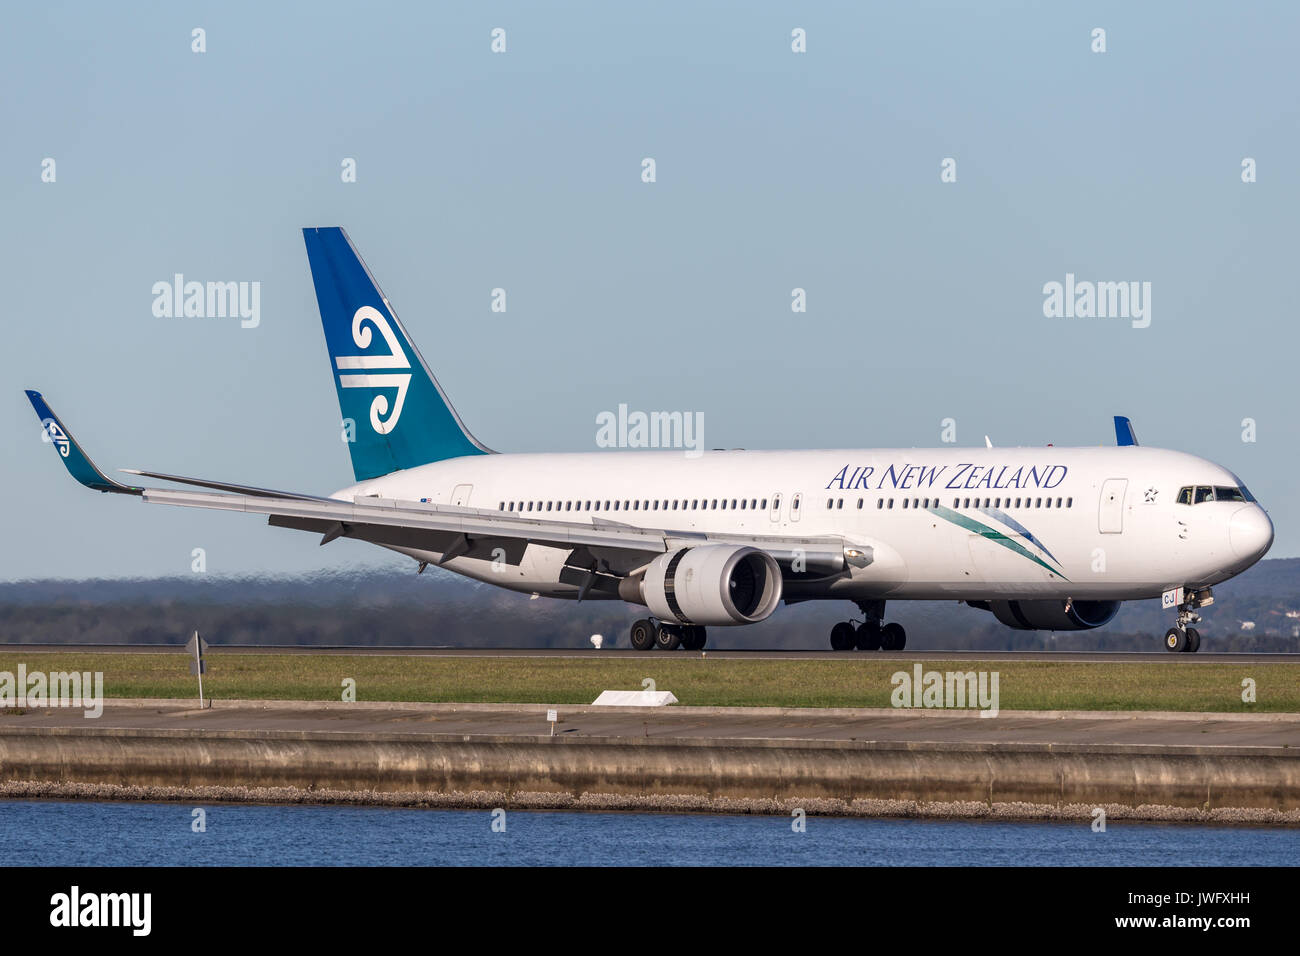 Air New Zealand Boeing 767 Landing at Sydney Airport. Stock Photo